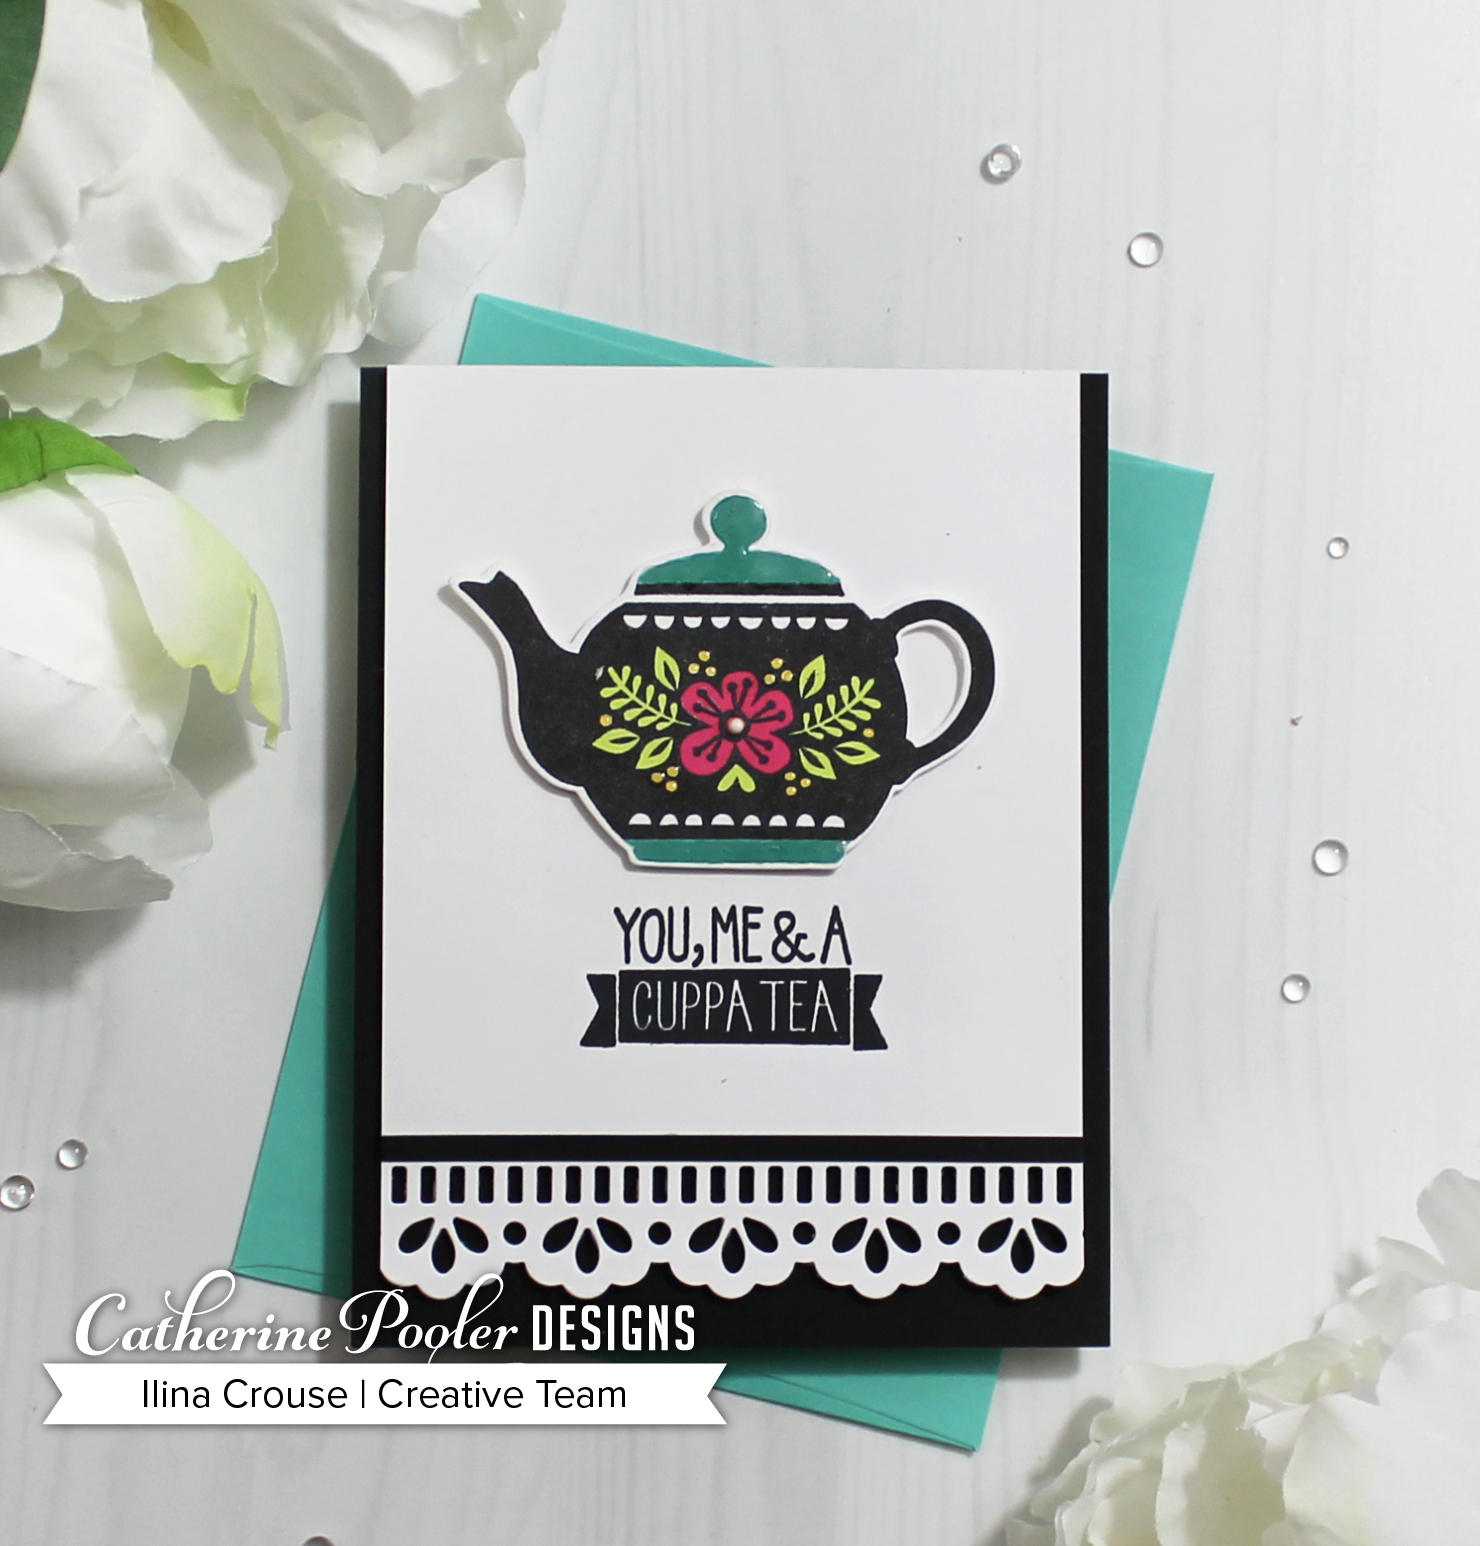 Happy Anniversary card with Lydia Evans - Catherine Pooler Designs